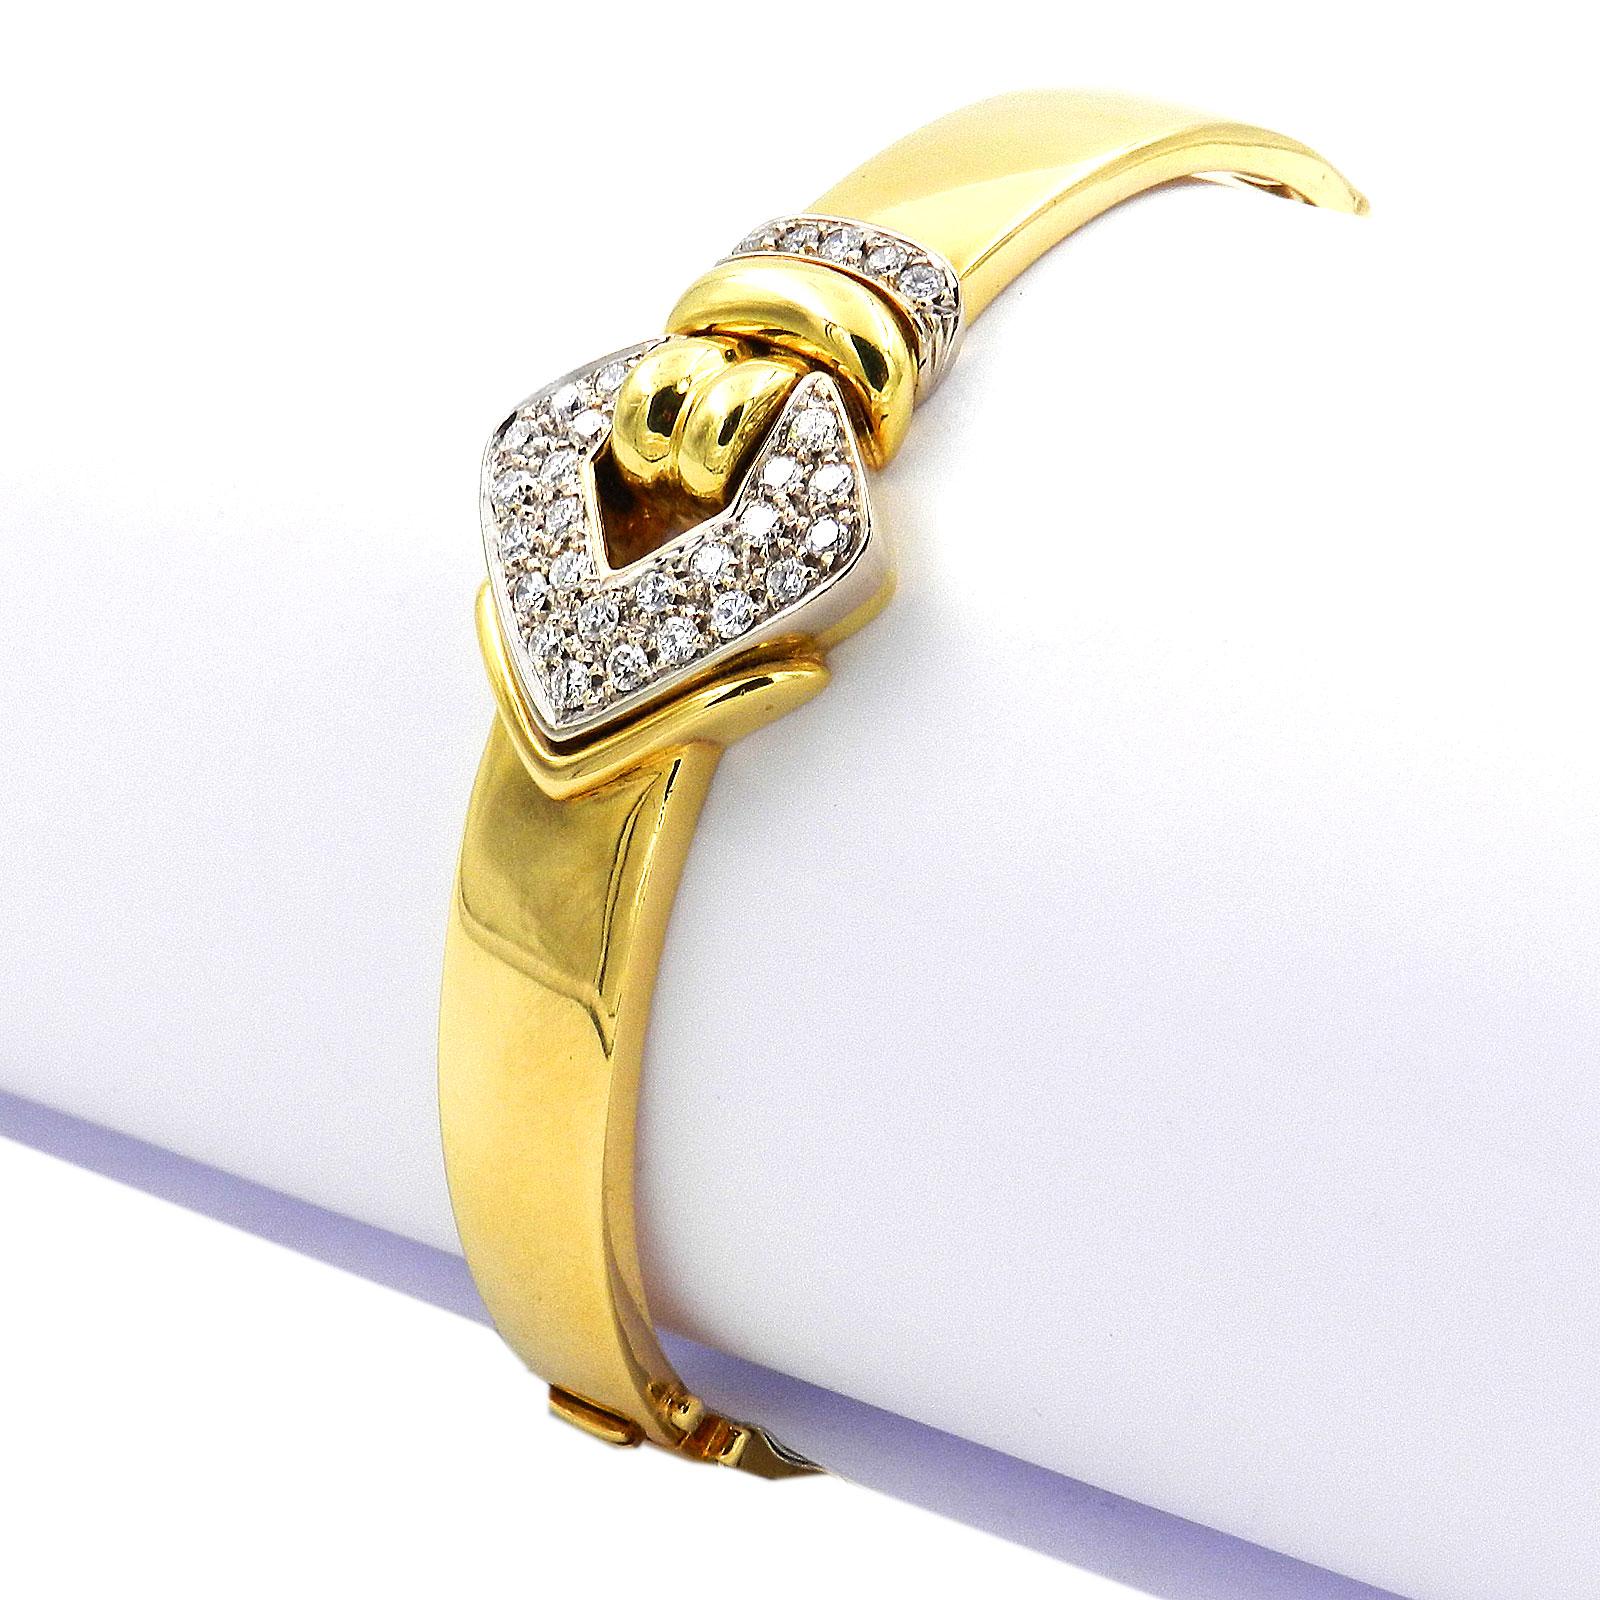 Leo Pizzo signed 0.9 Carat Diamond 18 K Gold Bangle Bracelet

Decorative bangle handmade in the italian jewelry manufacture Leo Pizzo from high-carat gold, set on the front with a white golden buckle motif and pave set with 29 sparkling